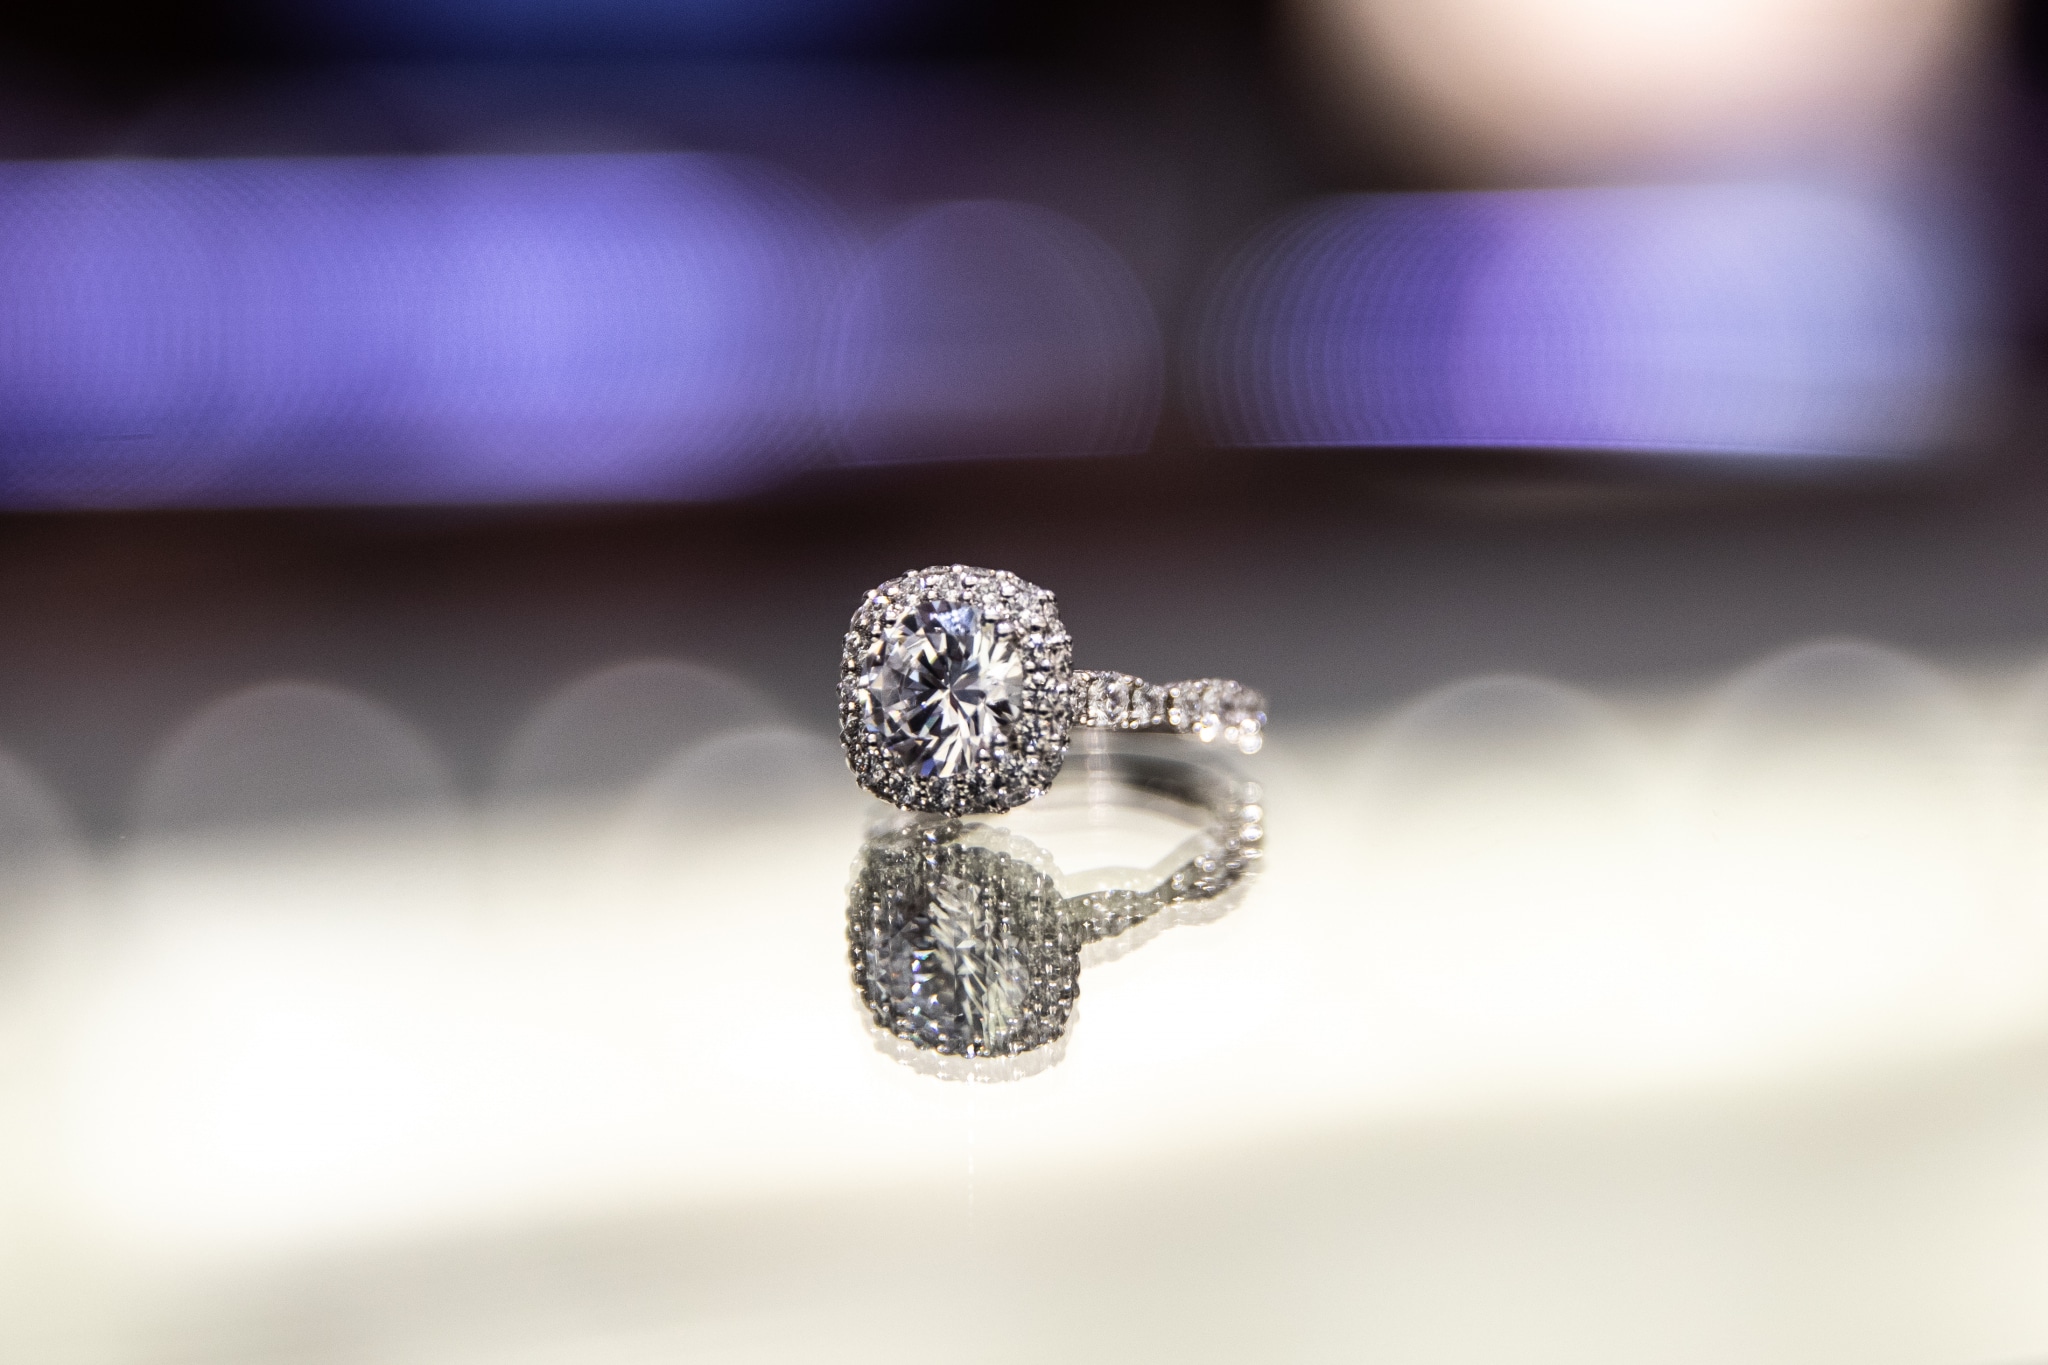 image 12 2 1 Don’t miss Tacori at Diamonds Direct in Birmingham Sept. 13-14. Free gifts + 0% APR for 5 years!